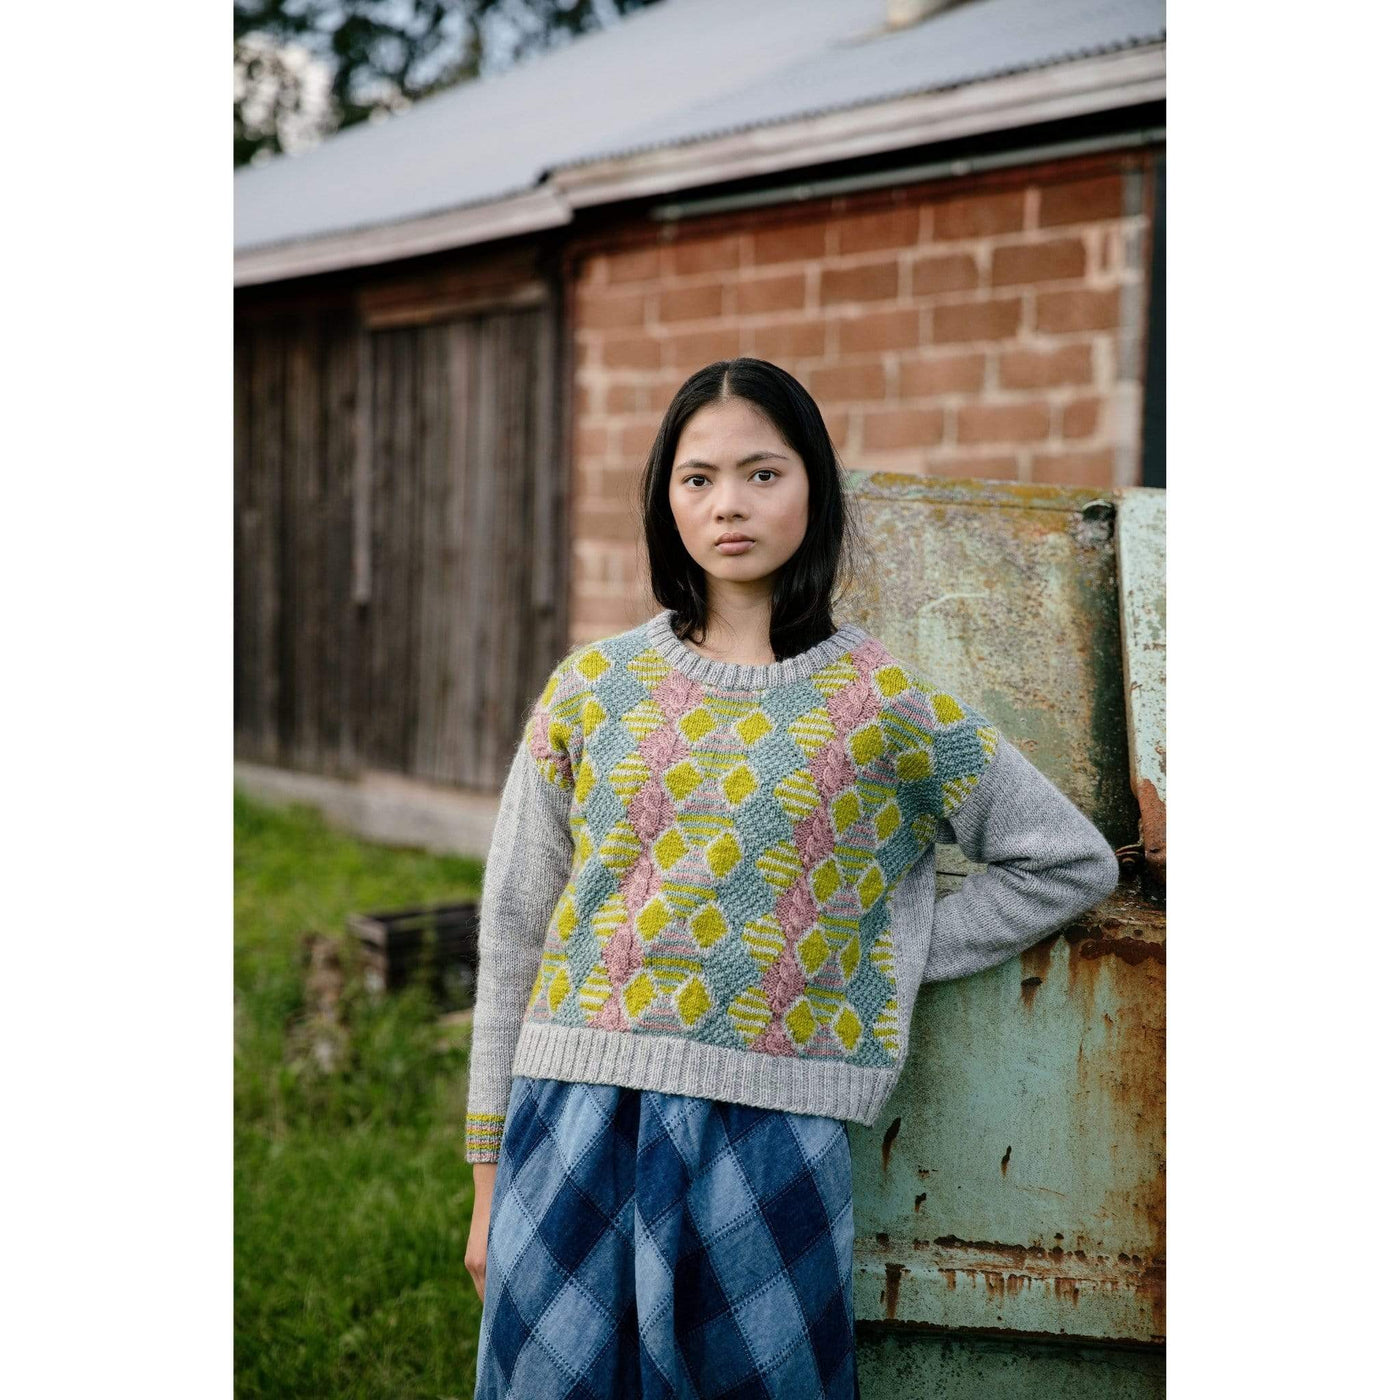 The Woolly Thistle Worsted – A Knitwear Collection Curated by Aimée Gille of La Bien Aimée published by Laine woman wearing grey knitted sweater with yellow, blue, and pink design in the front